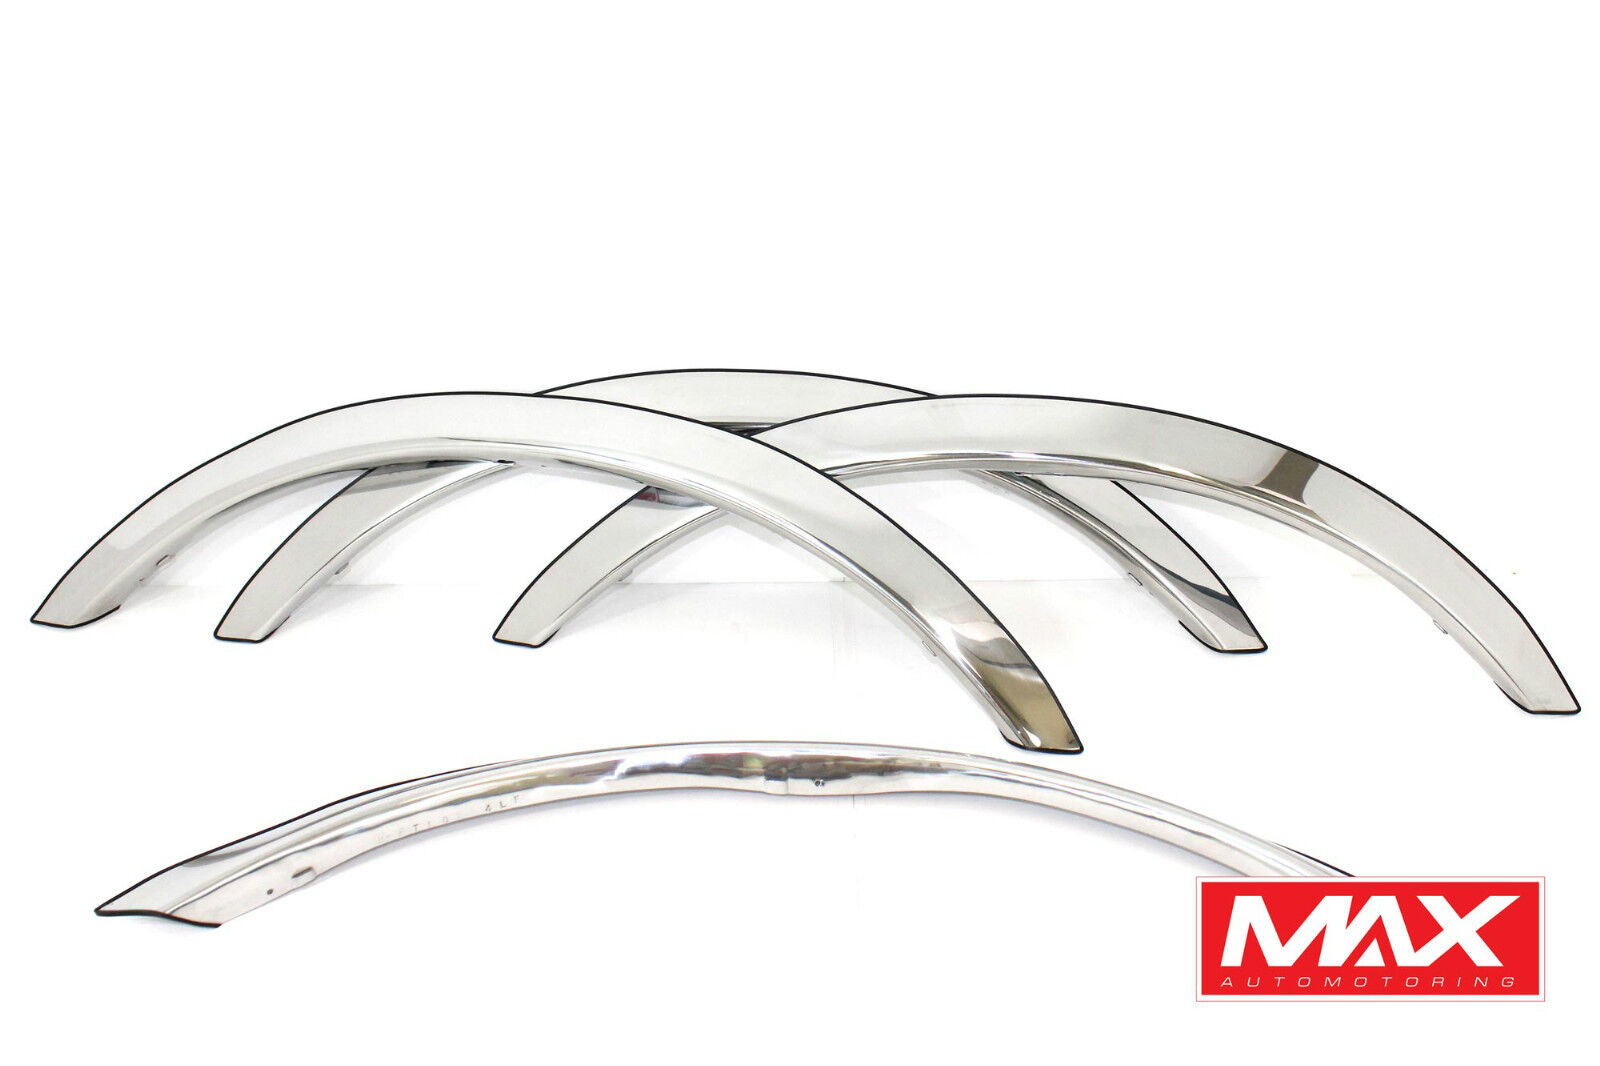 FTFD218 92-97 Ford Crown Victoria Mercury Grand Marquis Stainless Fender Trim